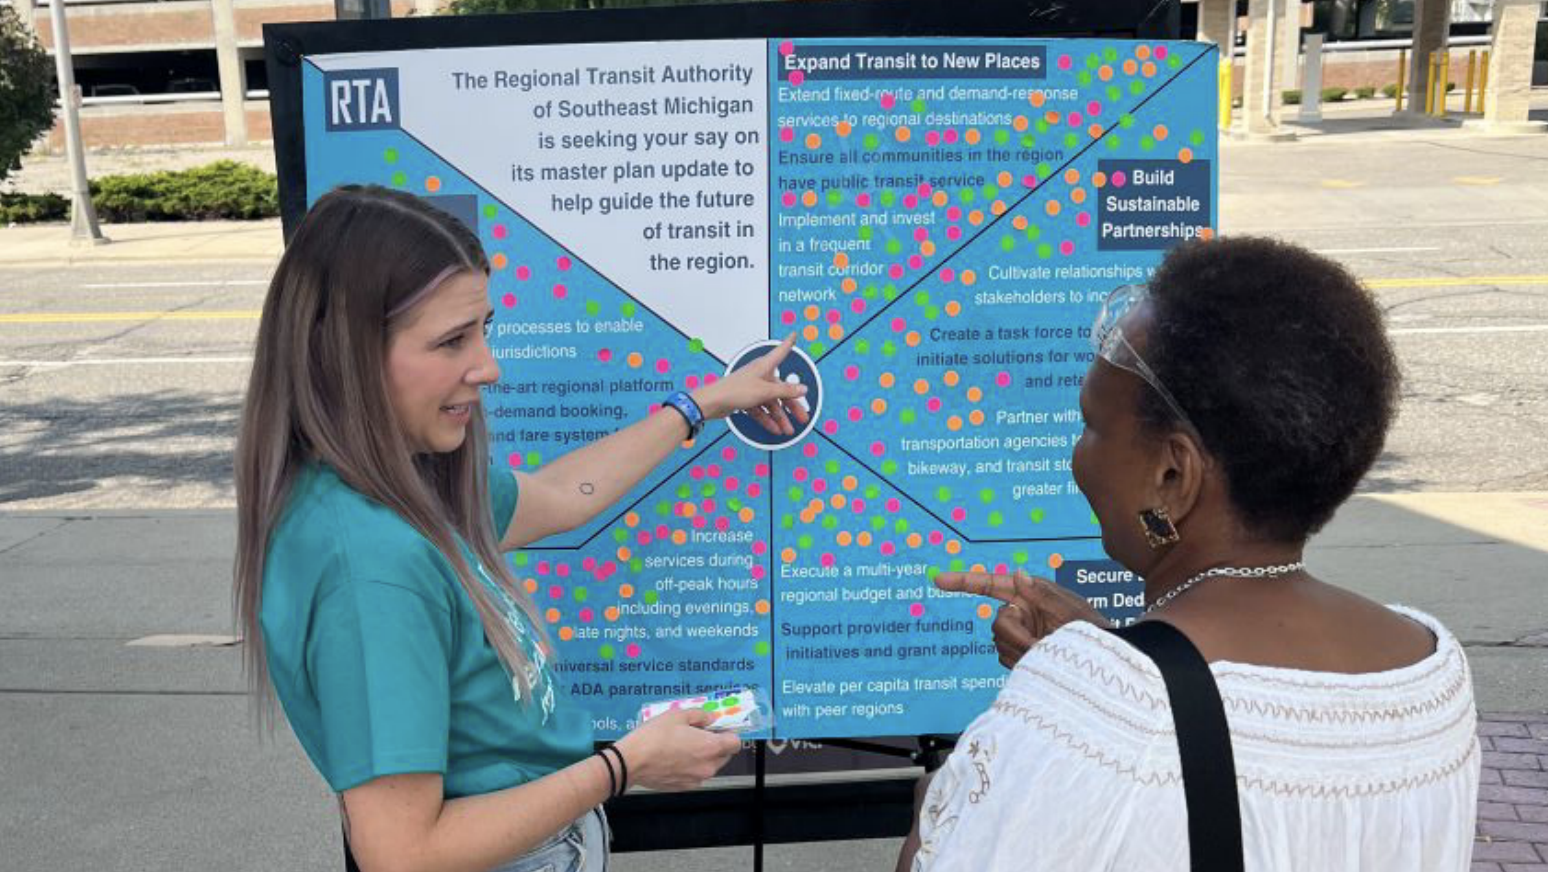 In August and September of 2023, RTA set up booths at 11 events across the four counties and spoke with riders at three regional transit centers. Attendees were asked to place stickers on an interactive board to identify which of the goals and strategies they felt were the highest priorities.